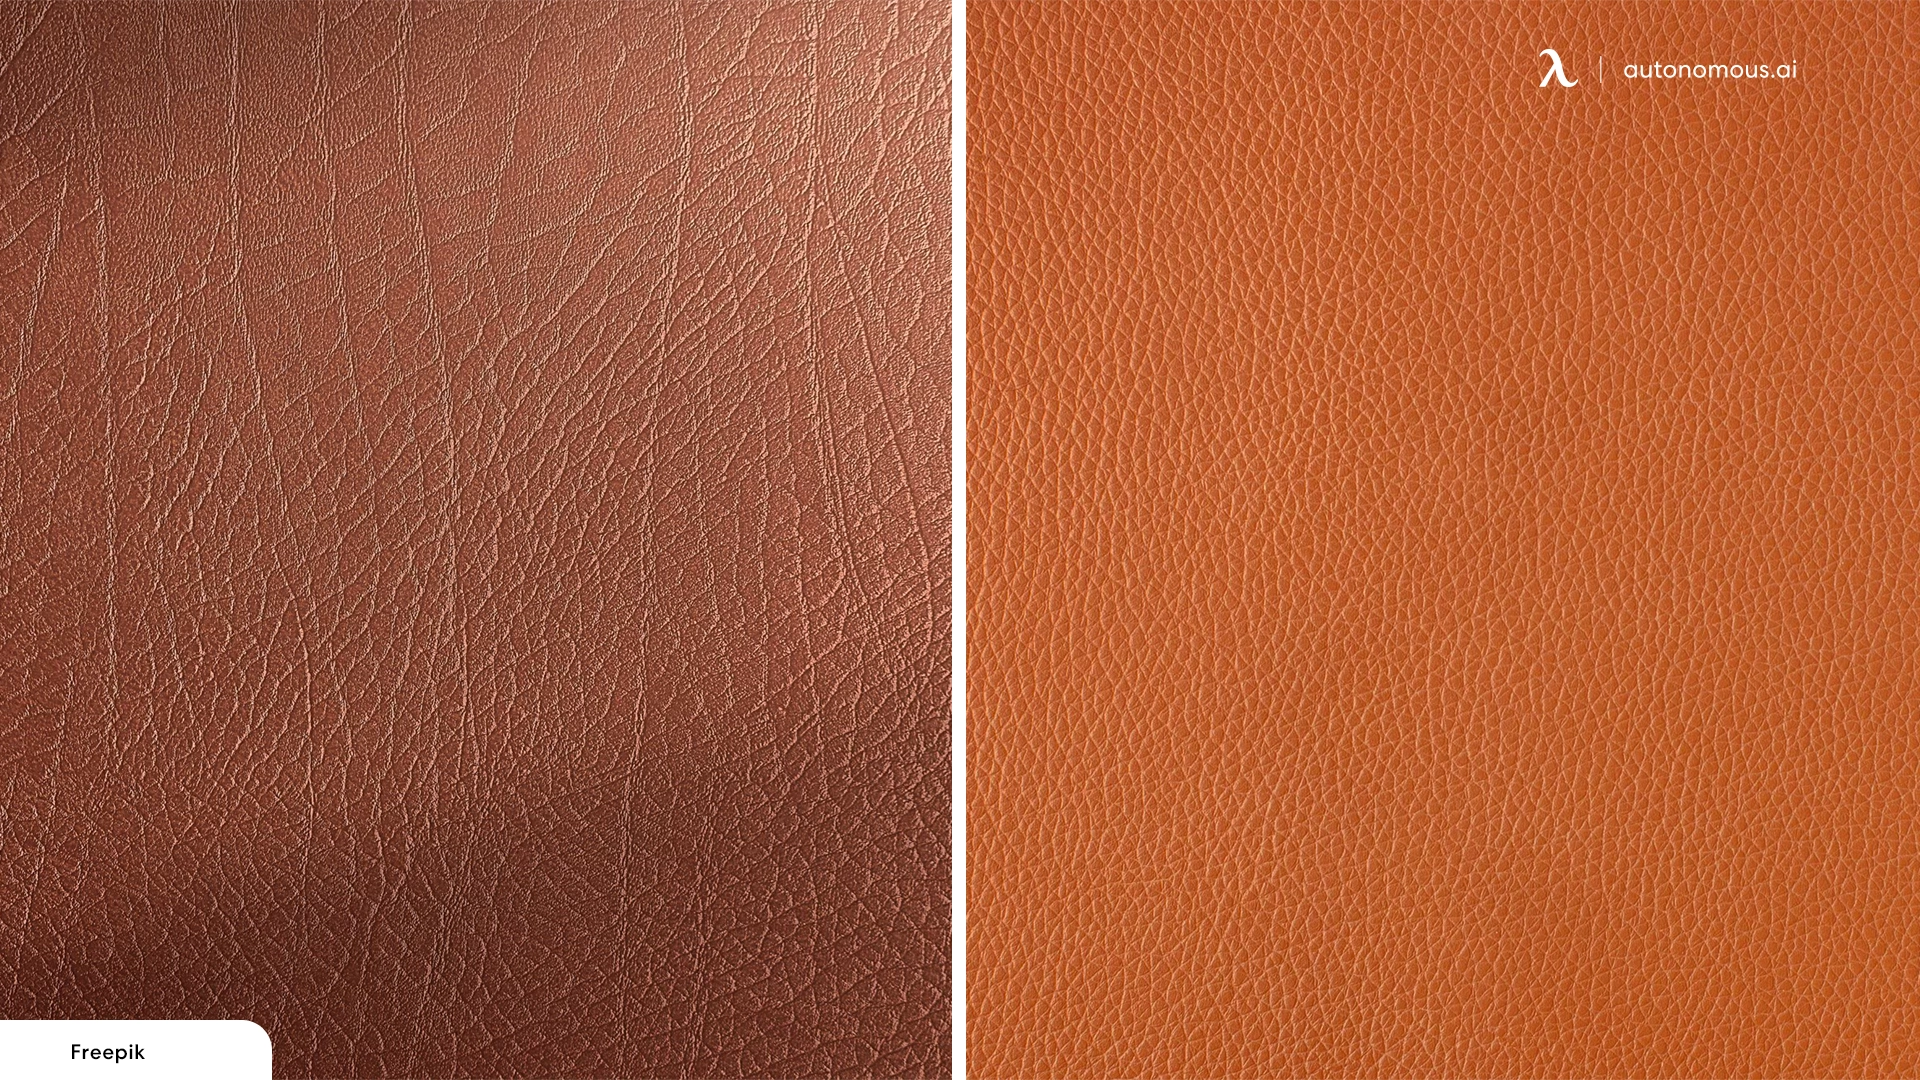 Faux Leather vs. Bonded Leather